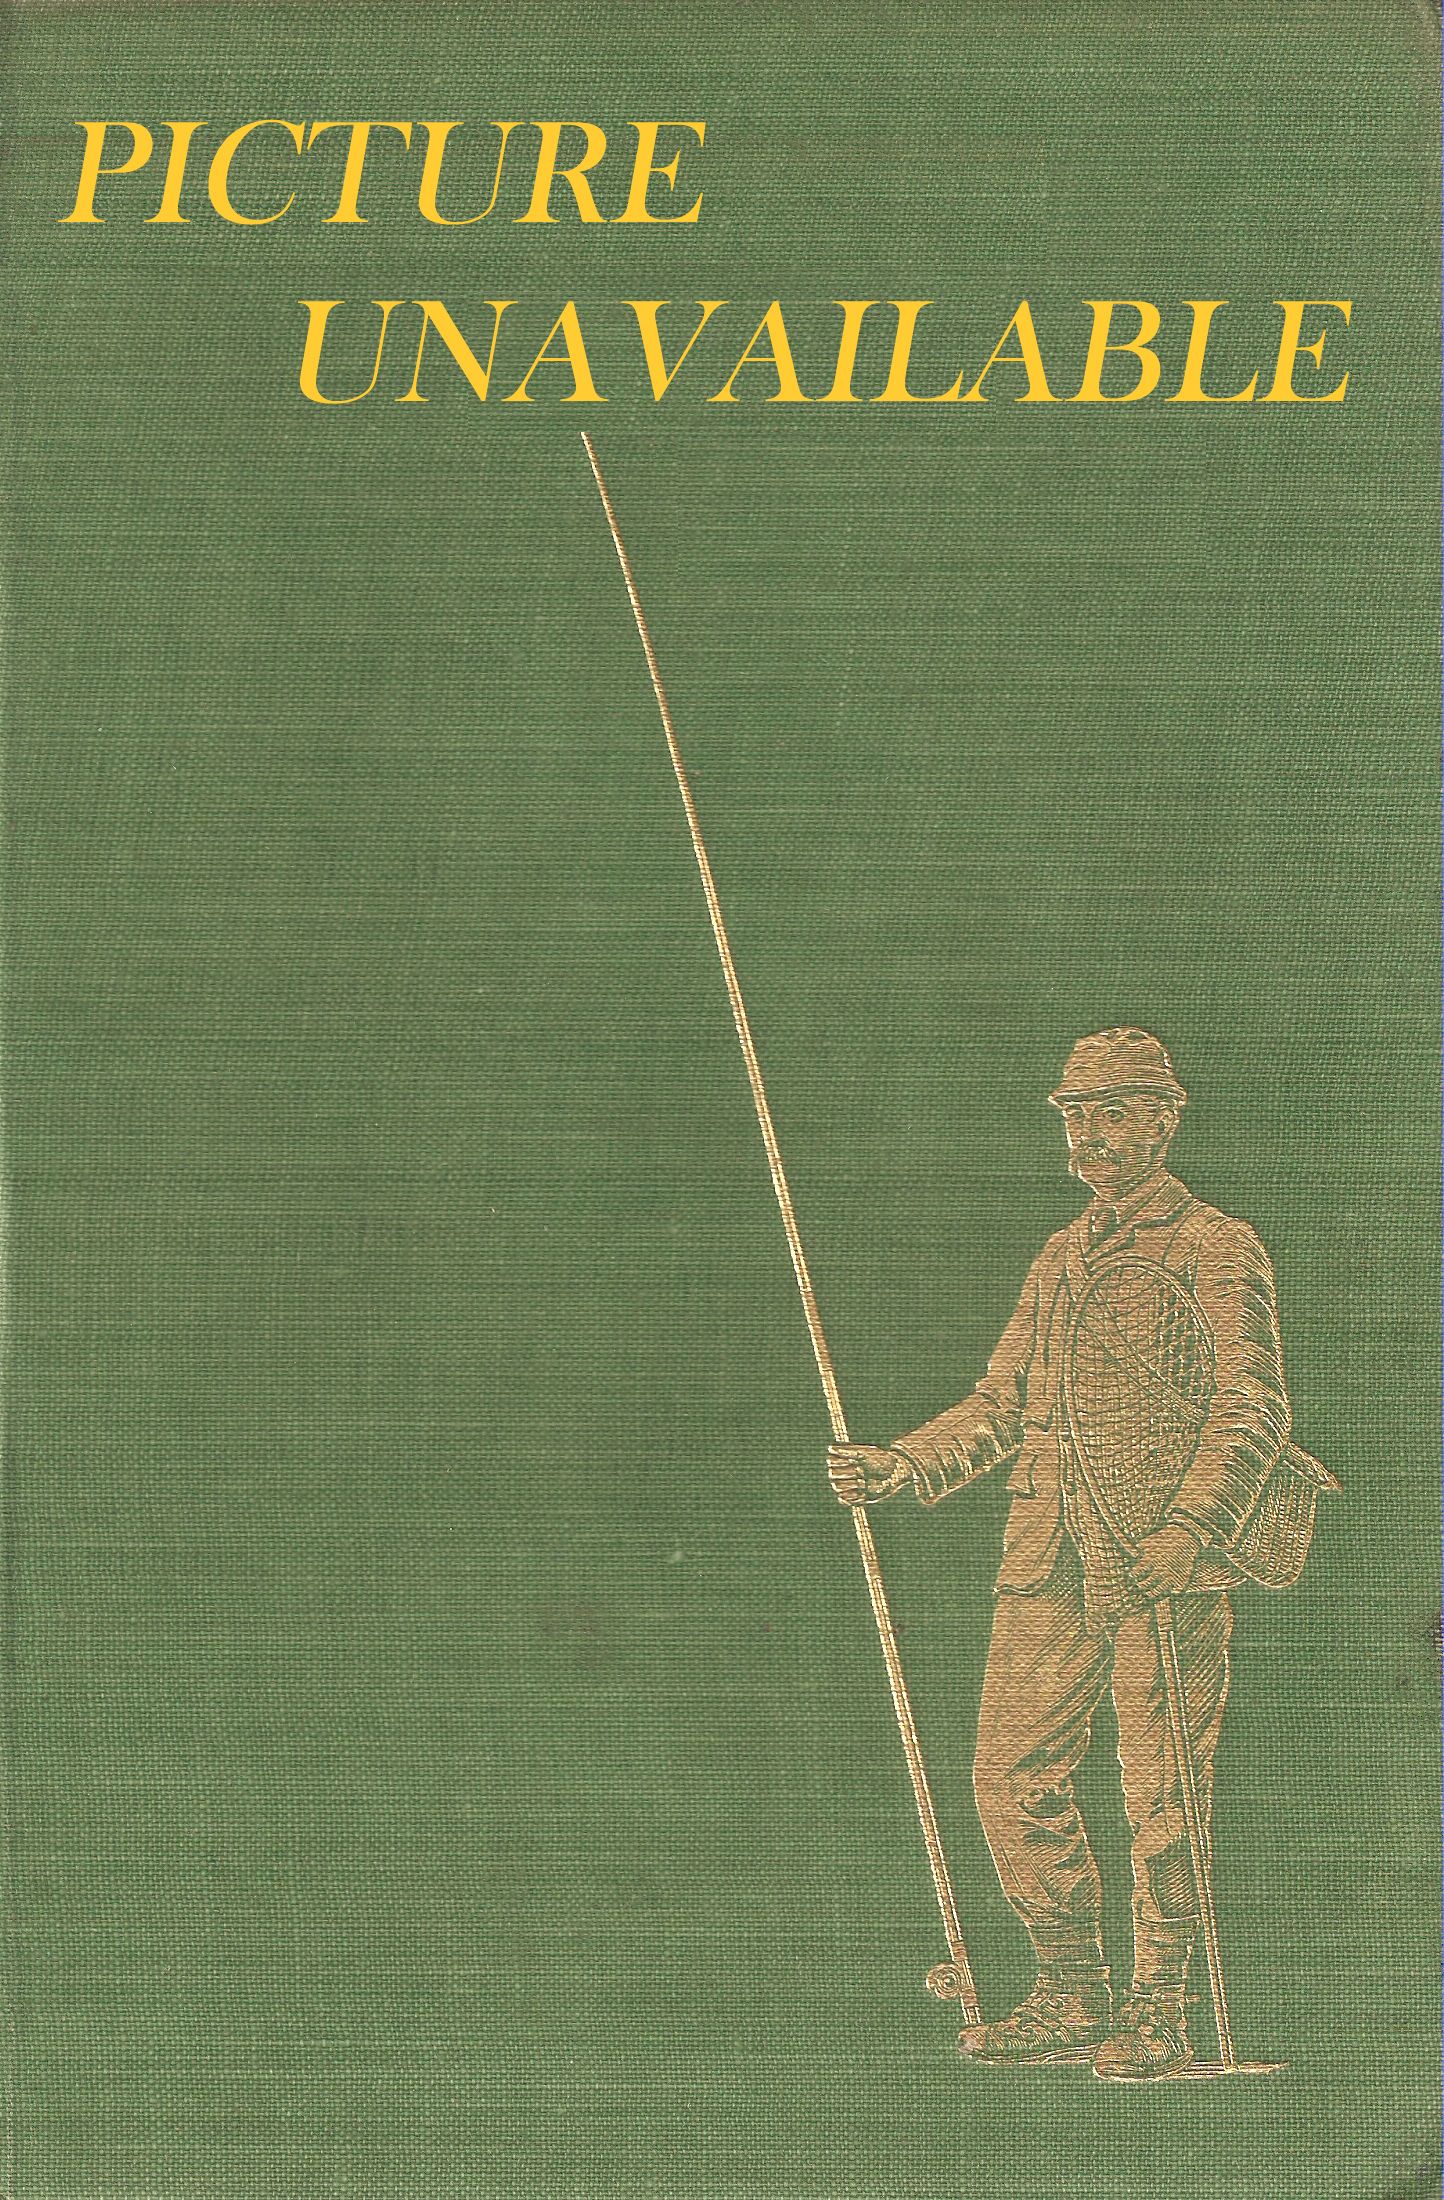 ROWLAND WARD'S SPORTSMAN'S HANDBOOK TO COLLECTING AND PRESERVING TROPHIES  AND SPECIMENS. Edited by J.B. Burlace. 11th edition 1923.